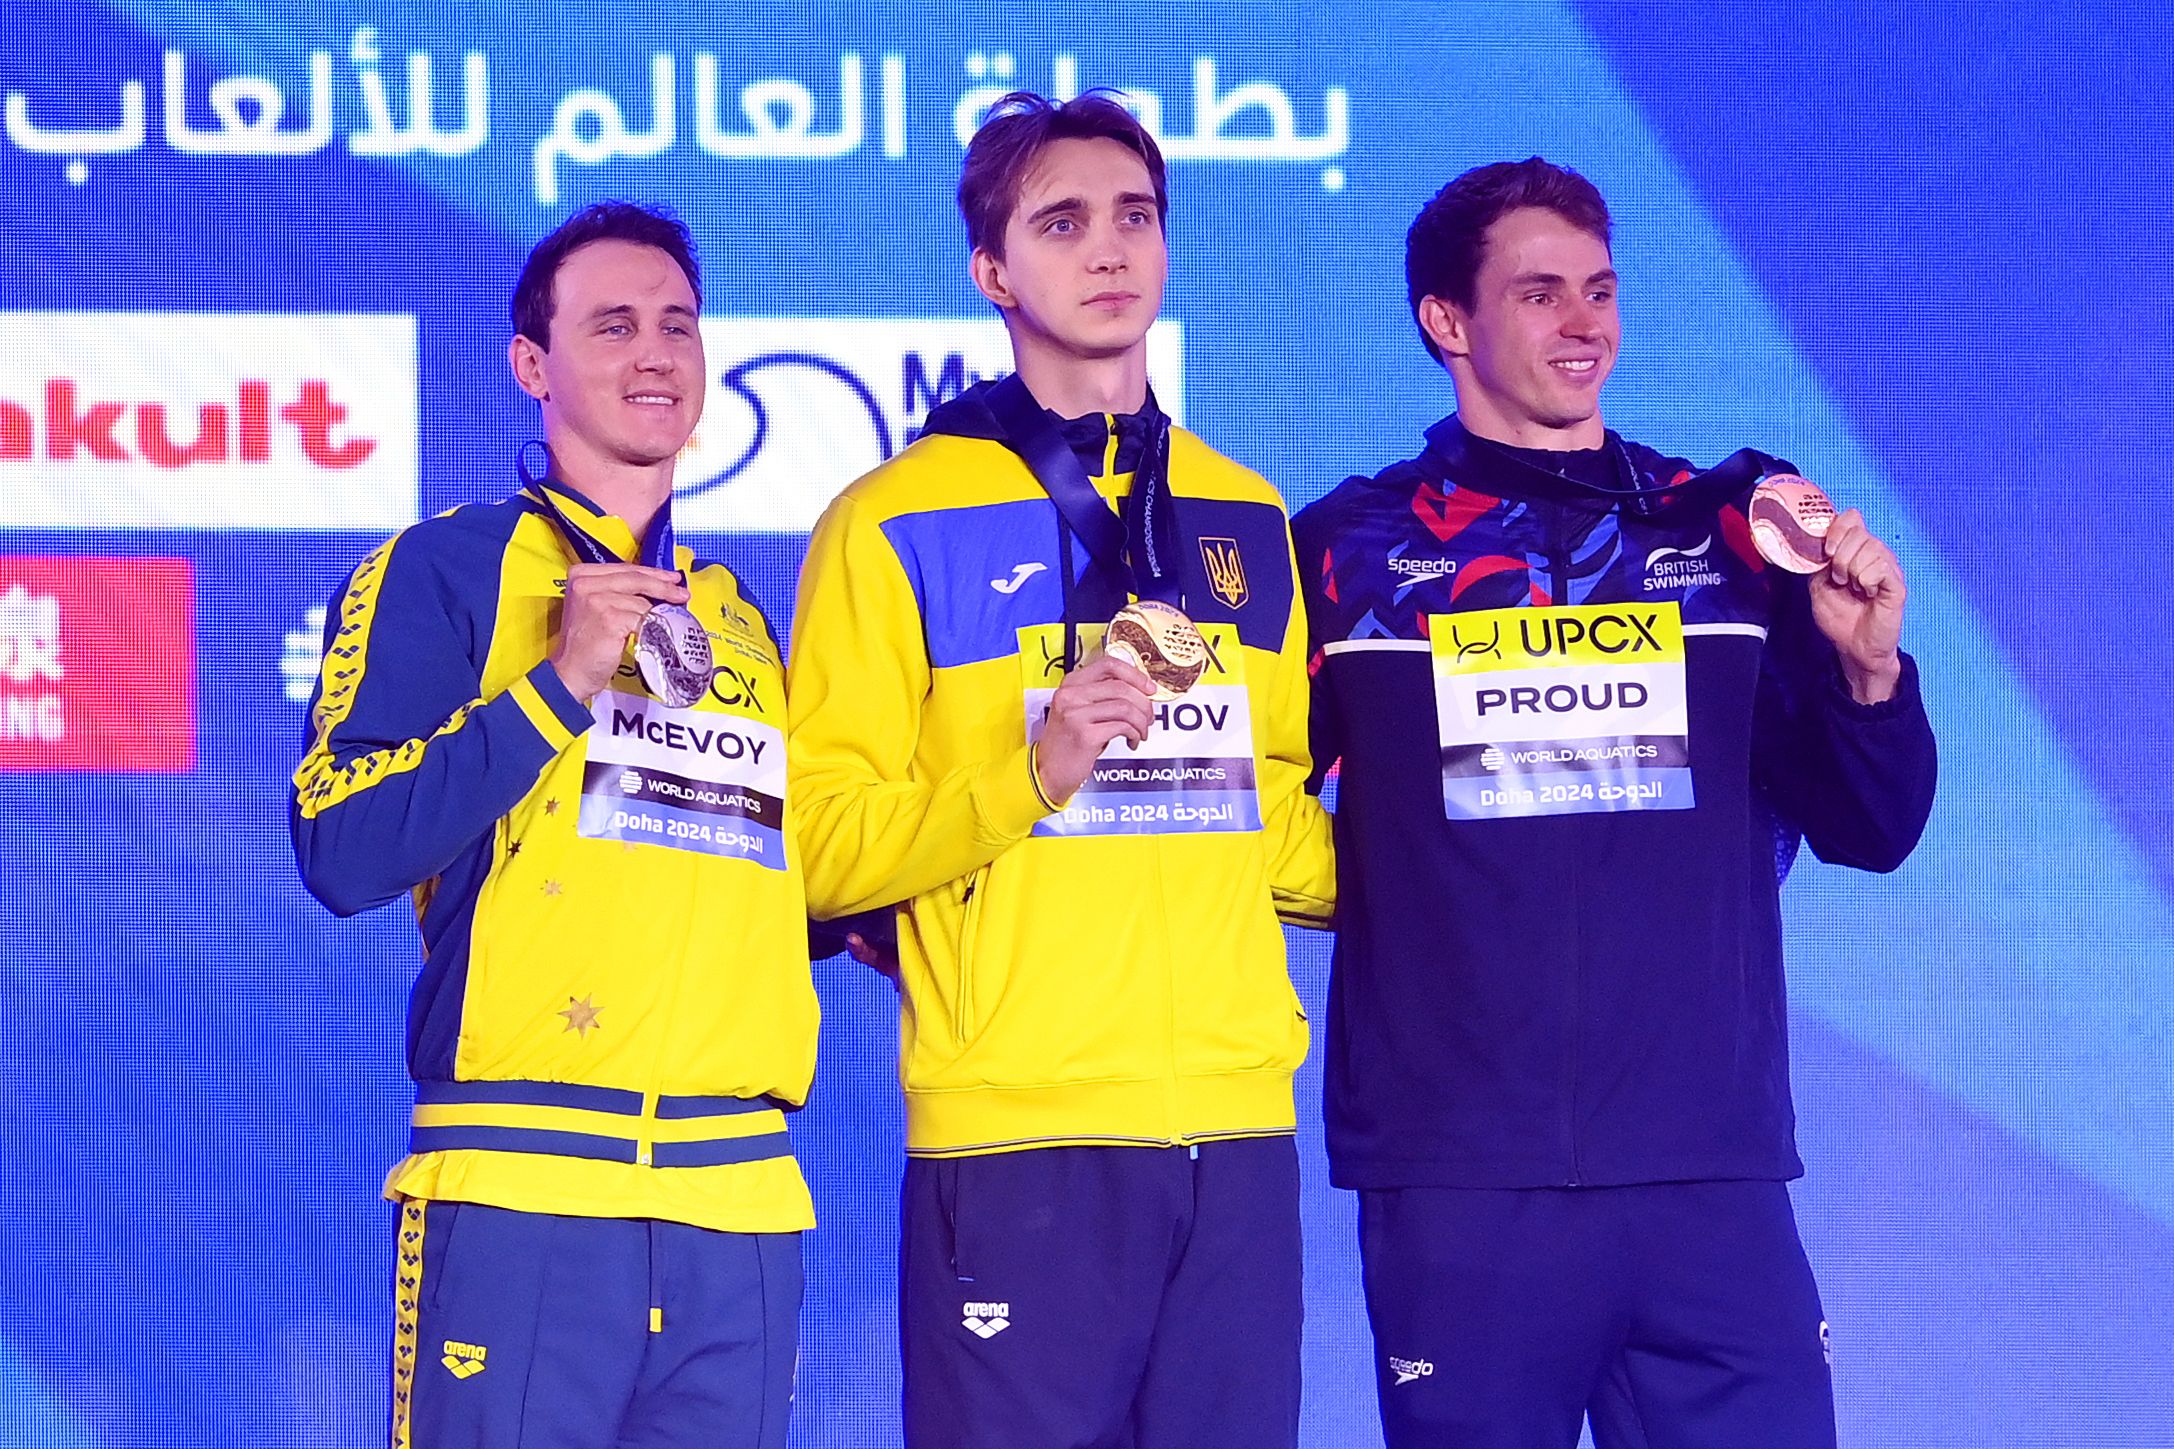 'Disappointed' Cameron McEvoy pipped to back-to-back World Championship gold by unknown Ukrainian